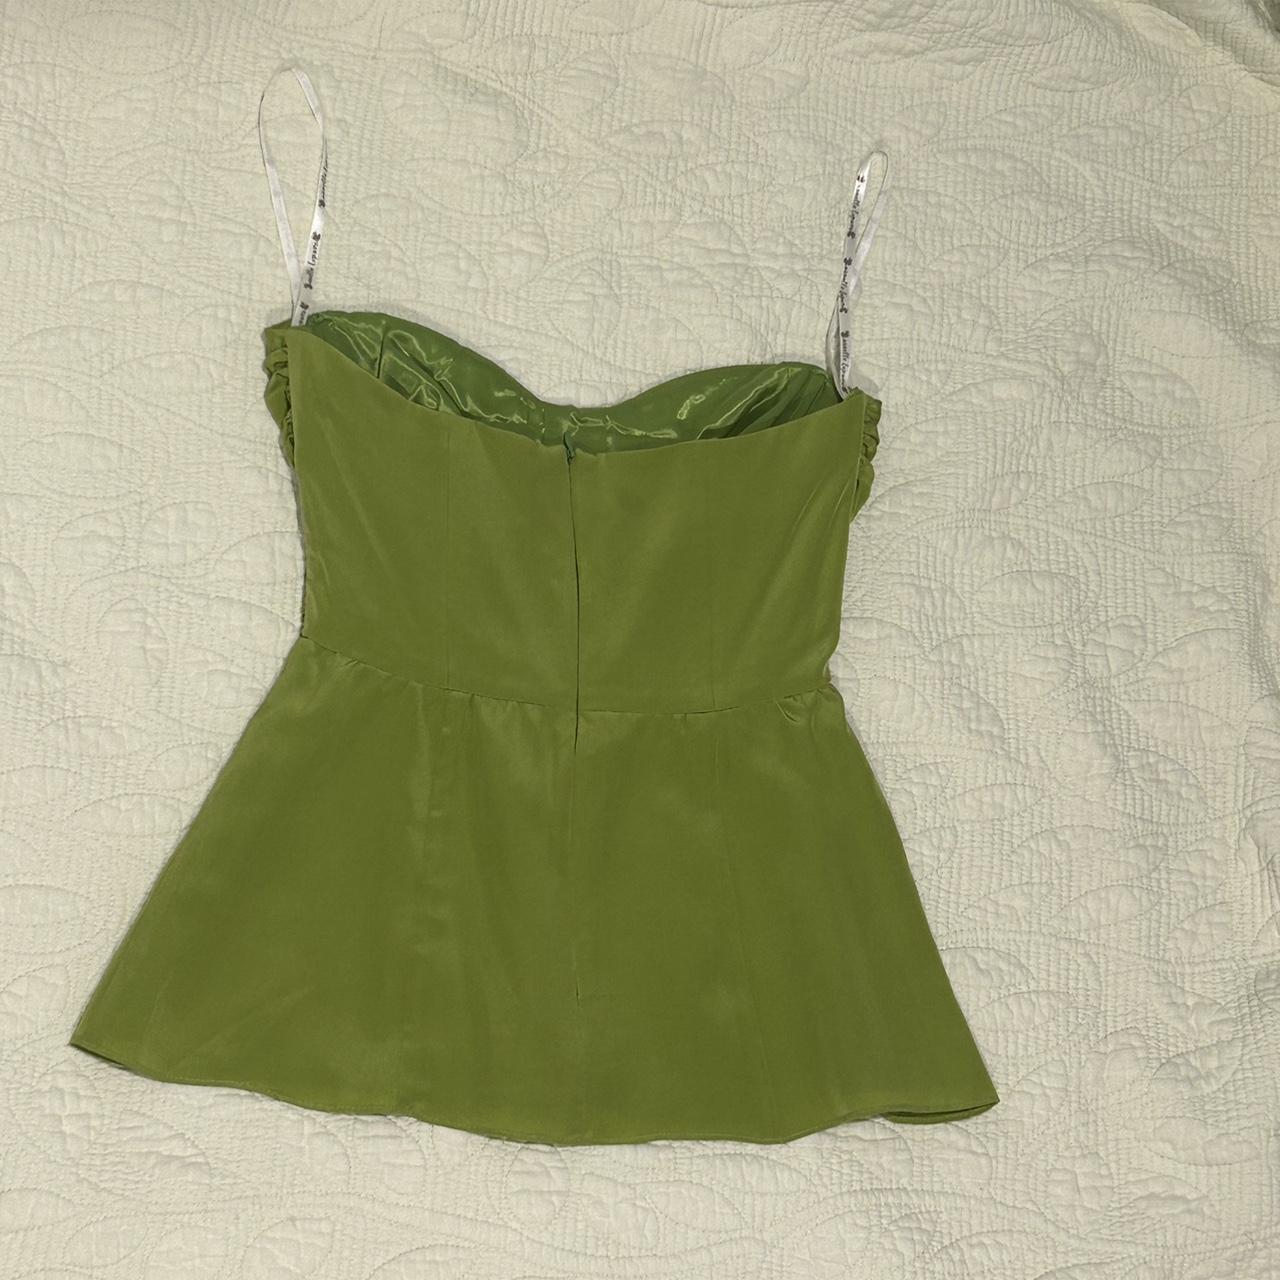 Party 90’s top (strapless) - Depop